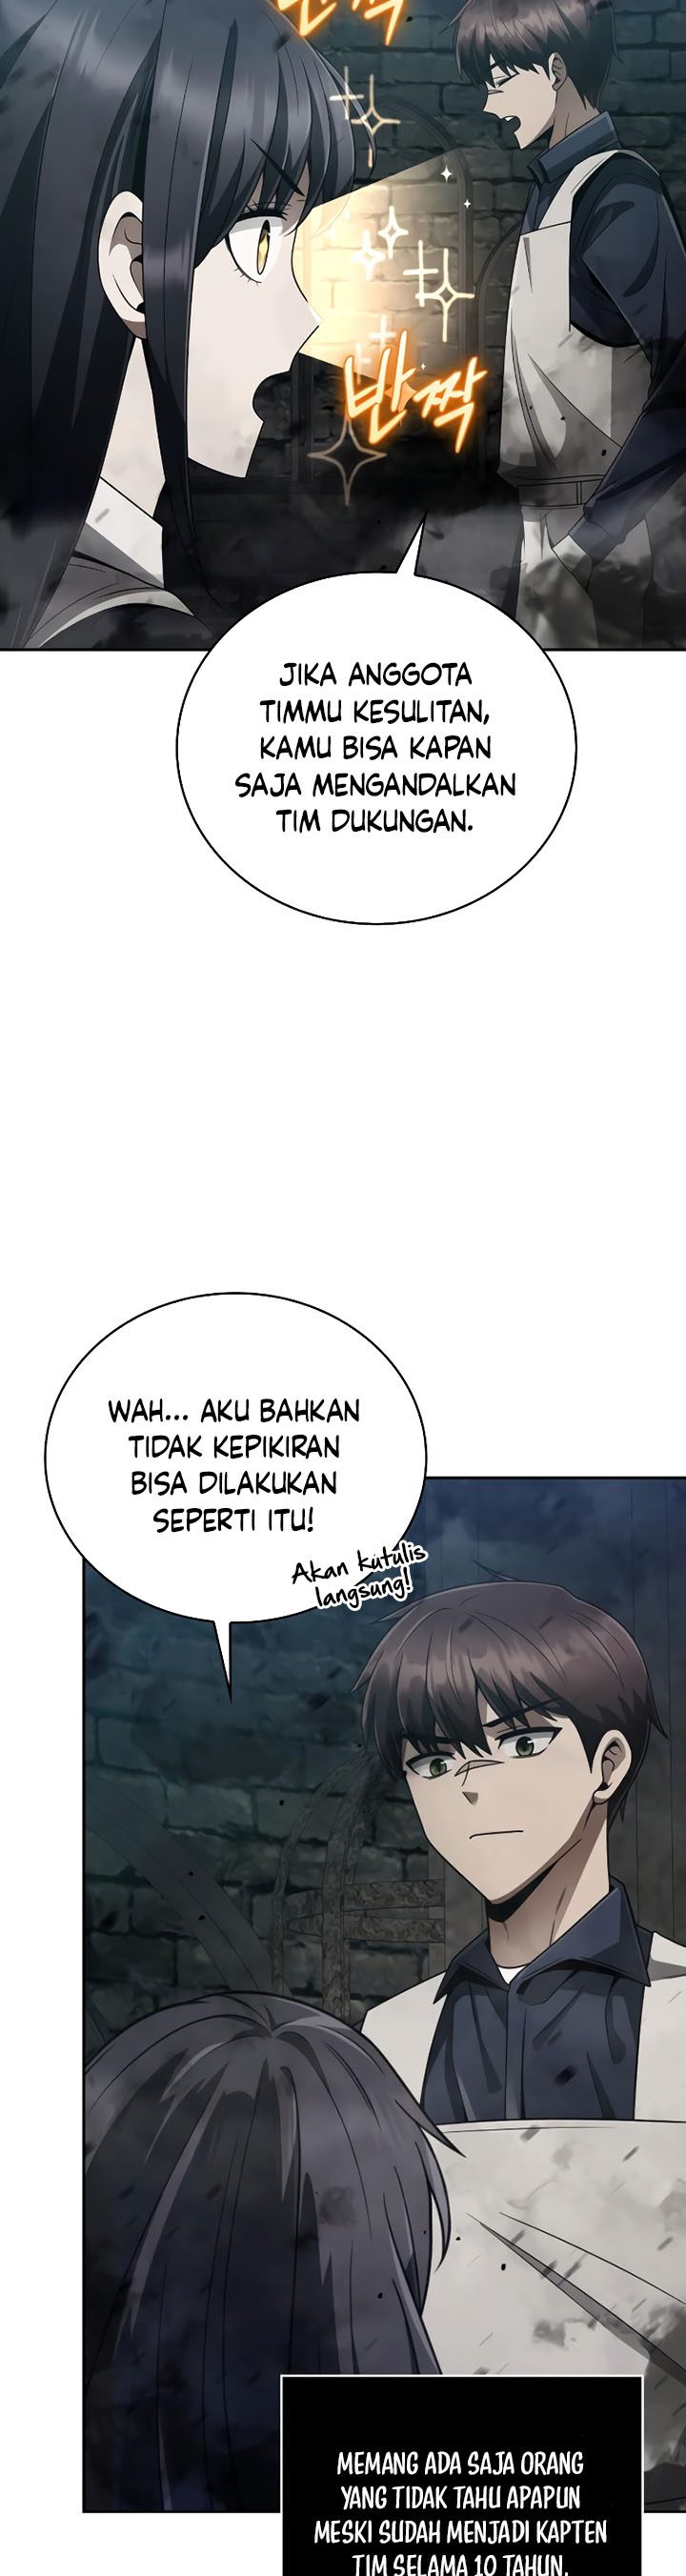 Dilarang COPAS - situs resmi www.mangacanblog.com - Komik clever cleaning life of the returned genius hunter 019 - chapter 19 20 Indonesia clever cleaning life of the returned genius hunter 019 - chapter 19 Terbaru 11|Baca Manga Komik Indonesia|Mangacan